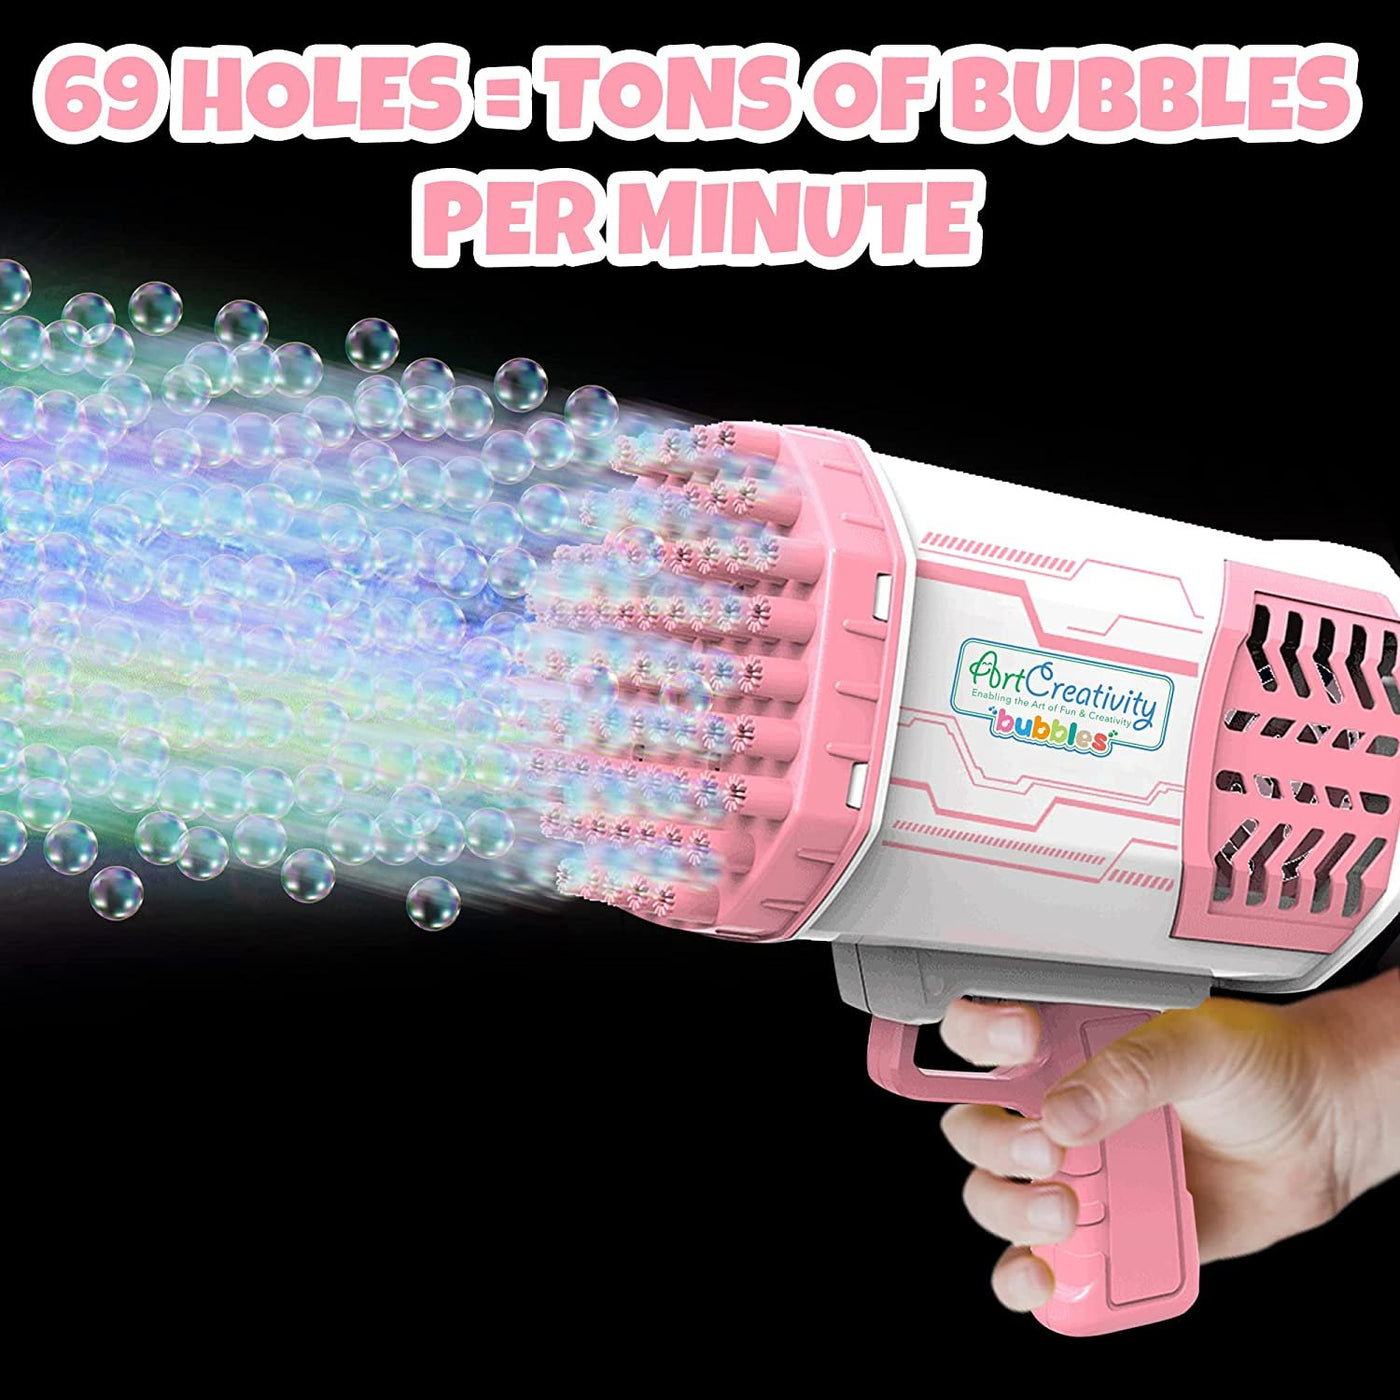  Bubble Machine Bubble Gun 69 Holes with Colorful Lights and  Bubble Solution, Bubble Blower Bubble Maker for Kids Toddlers Adults,  Birthday Christmas Toy Gift for Boys Girls Age 3 4 5